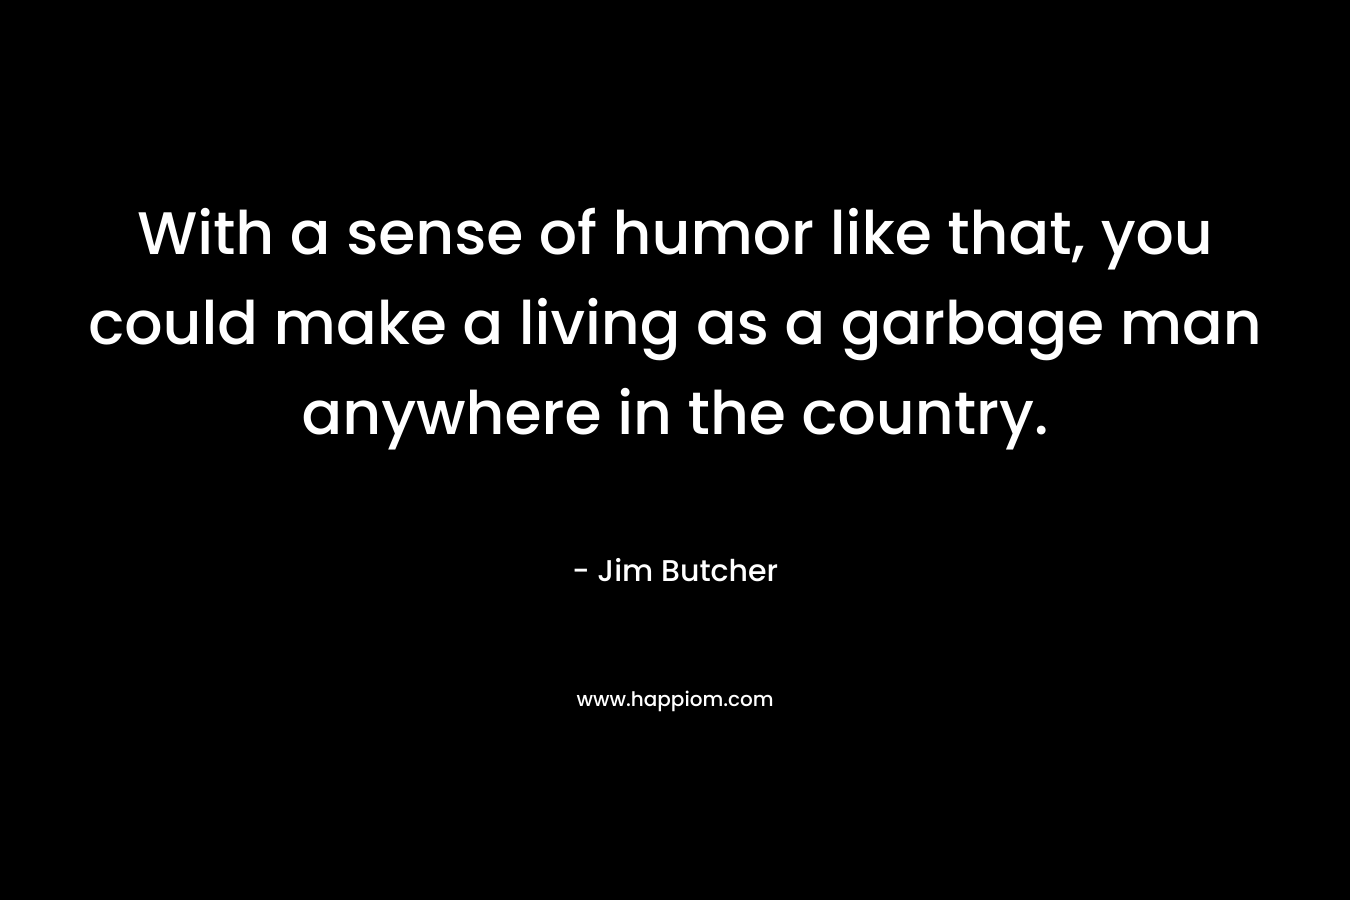 With a sense of humor like that, you could make a living as a garbage man anywhere in the country. – Jim Butcher